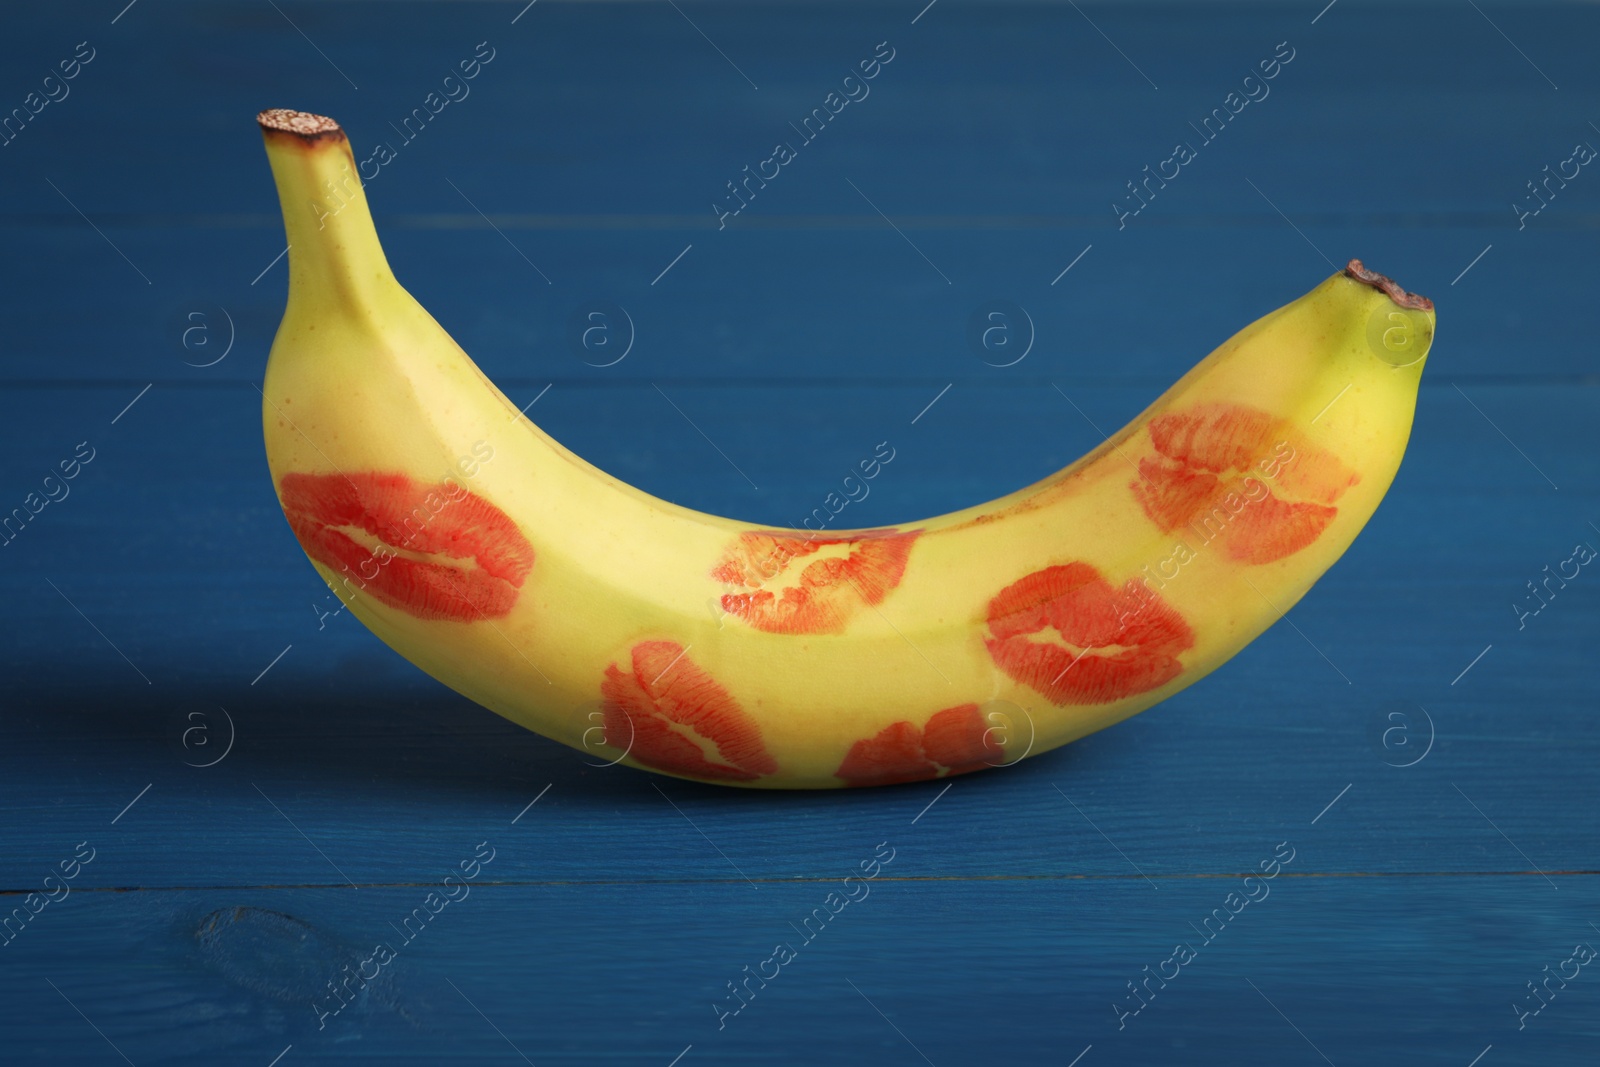 Photo of Banana covered with red lipstick marks on blue wooden table. Potency concept